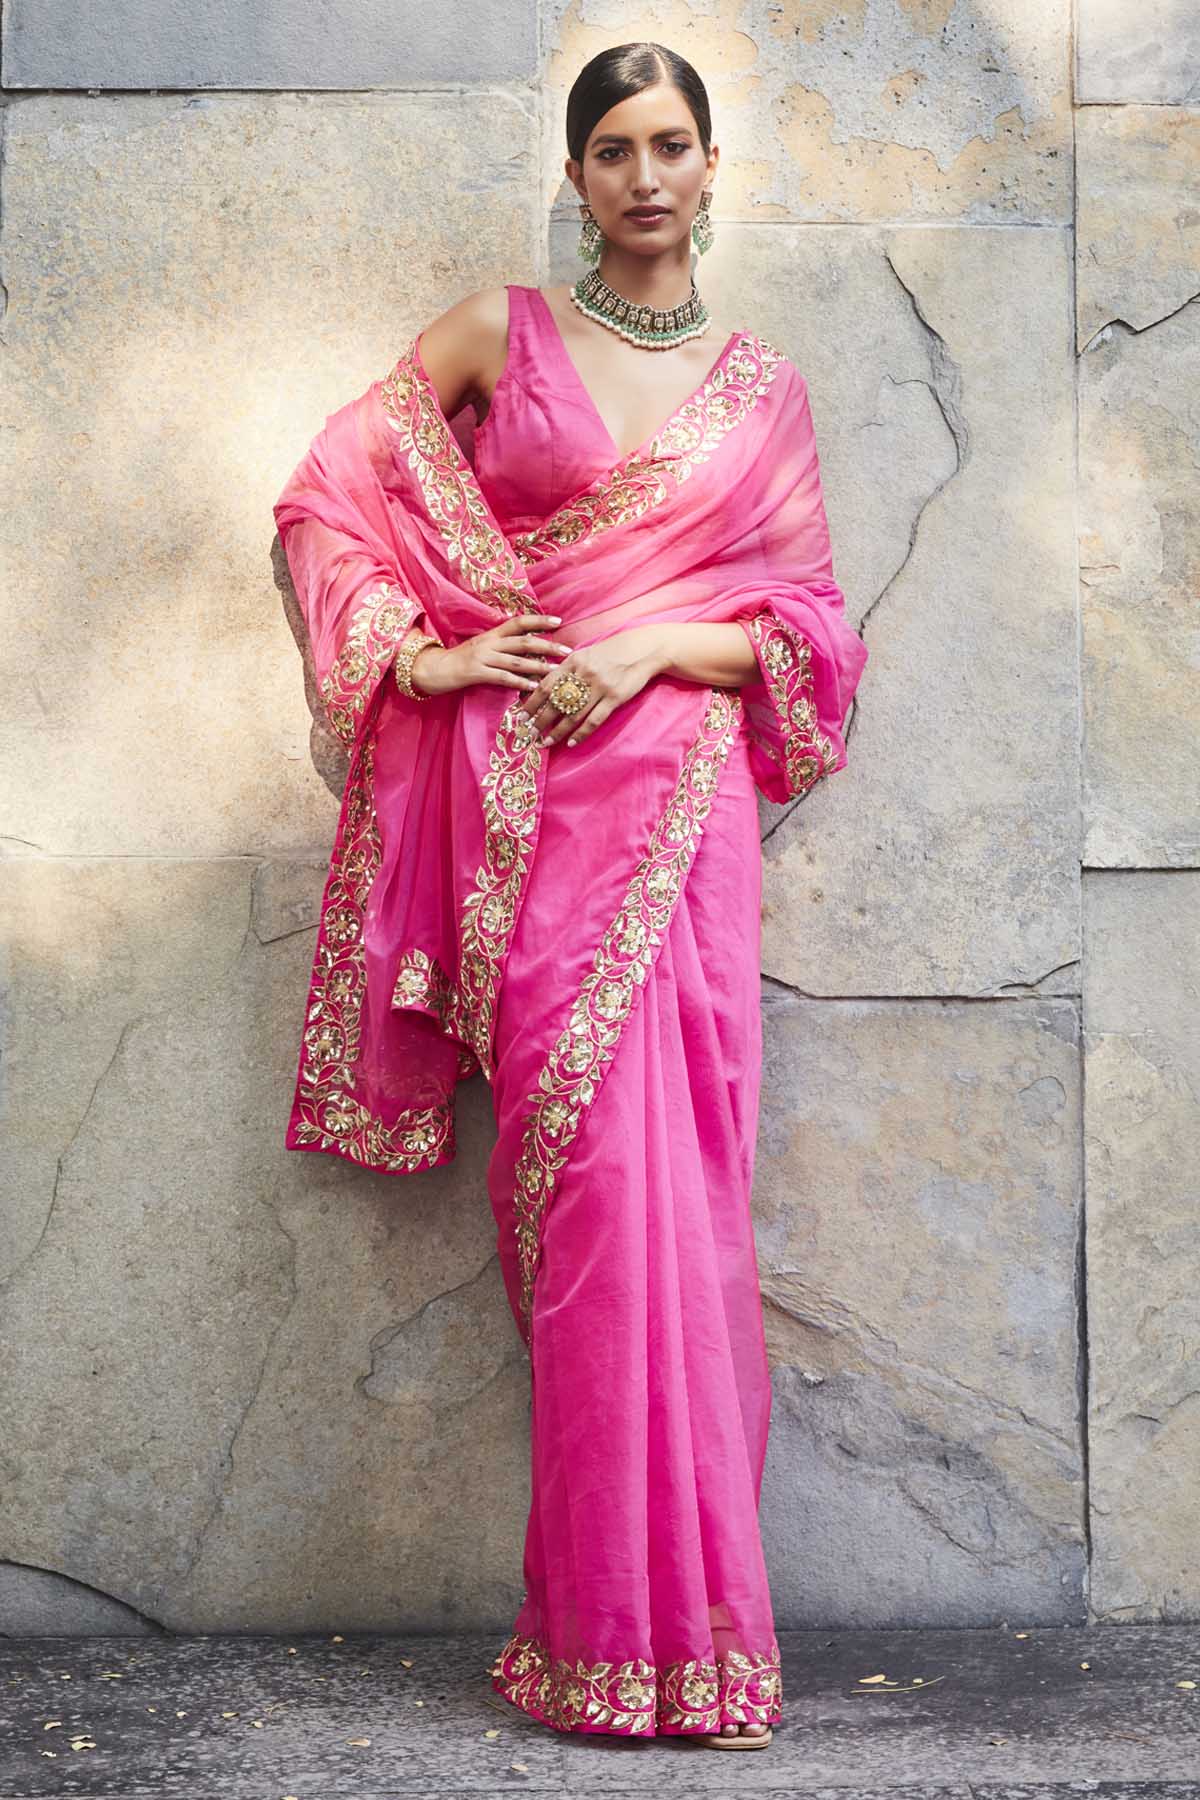 Designer Ranian Fuchsia silk organza saree with delicate floral pattern border in 3D sequins and zari. The saree comes with a plain satin silk blouse with a back hook For women Online at ScrollnShops